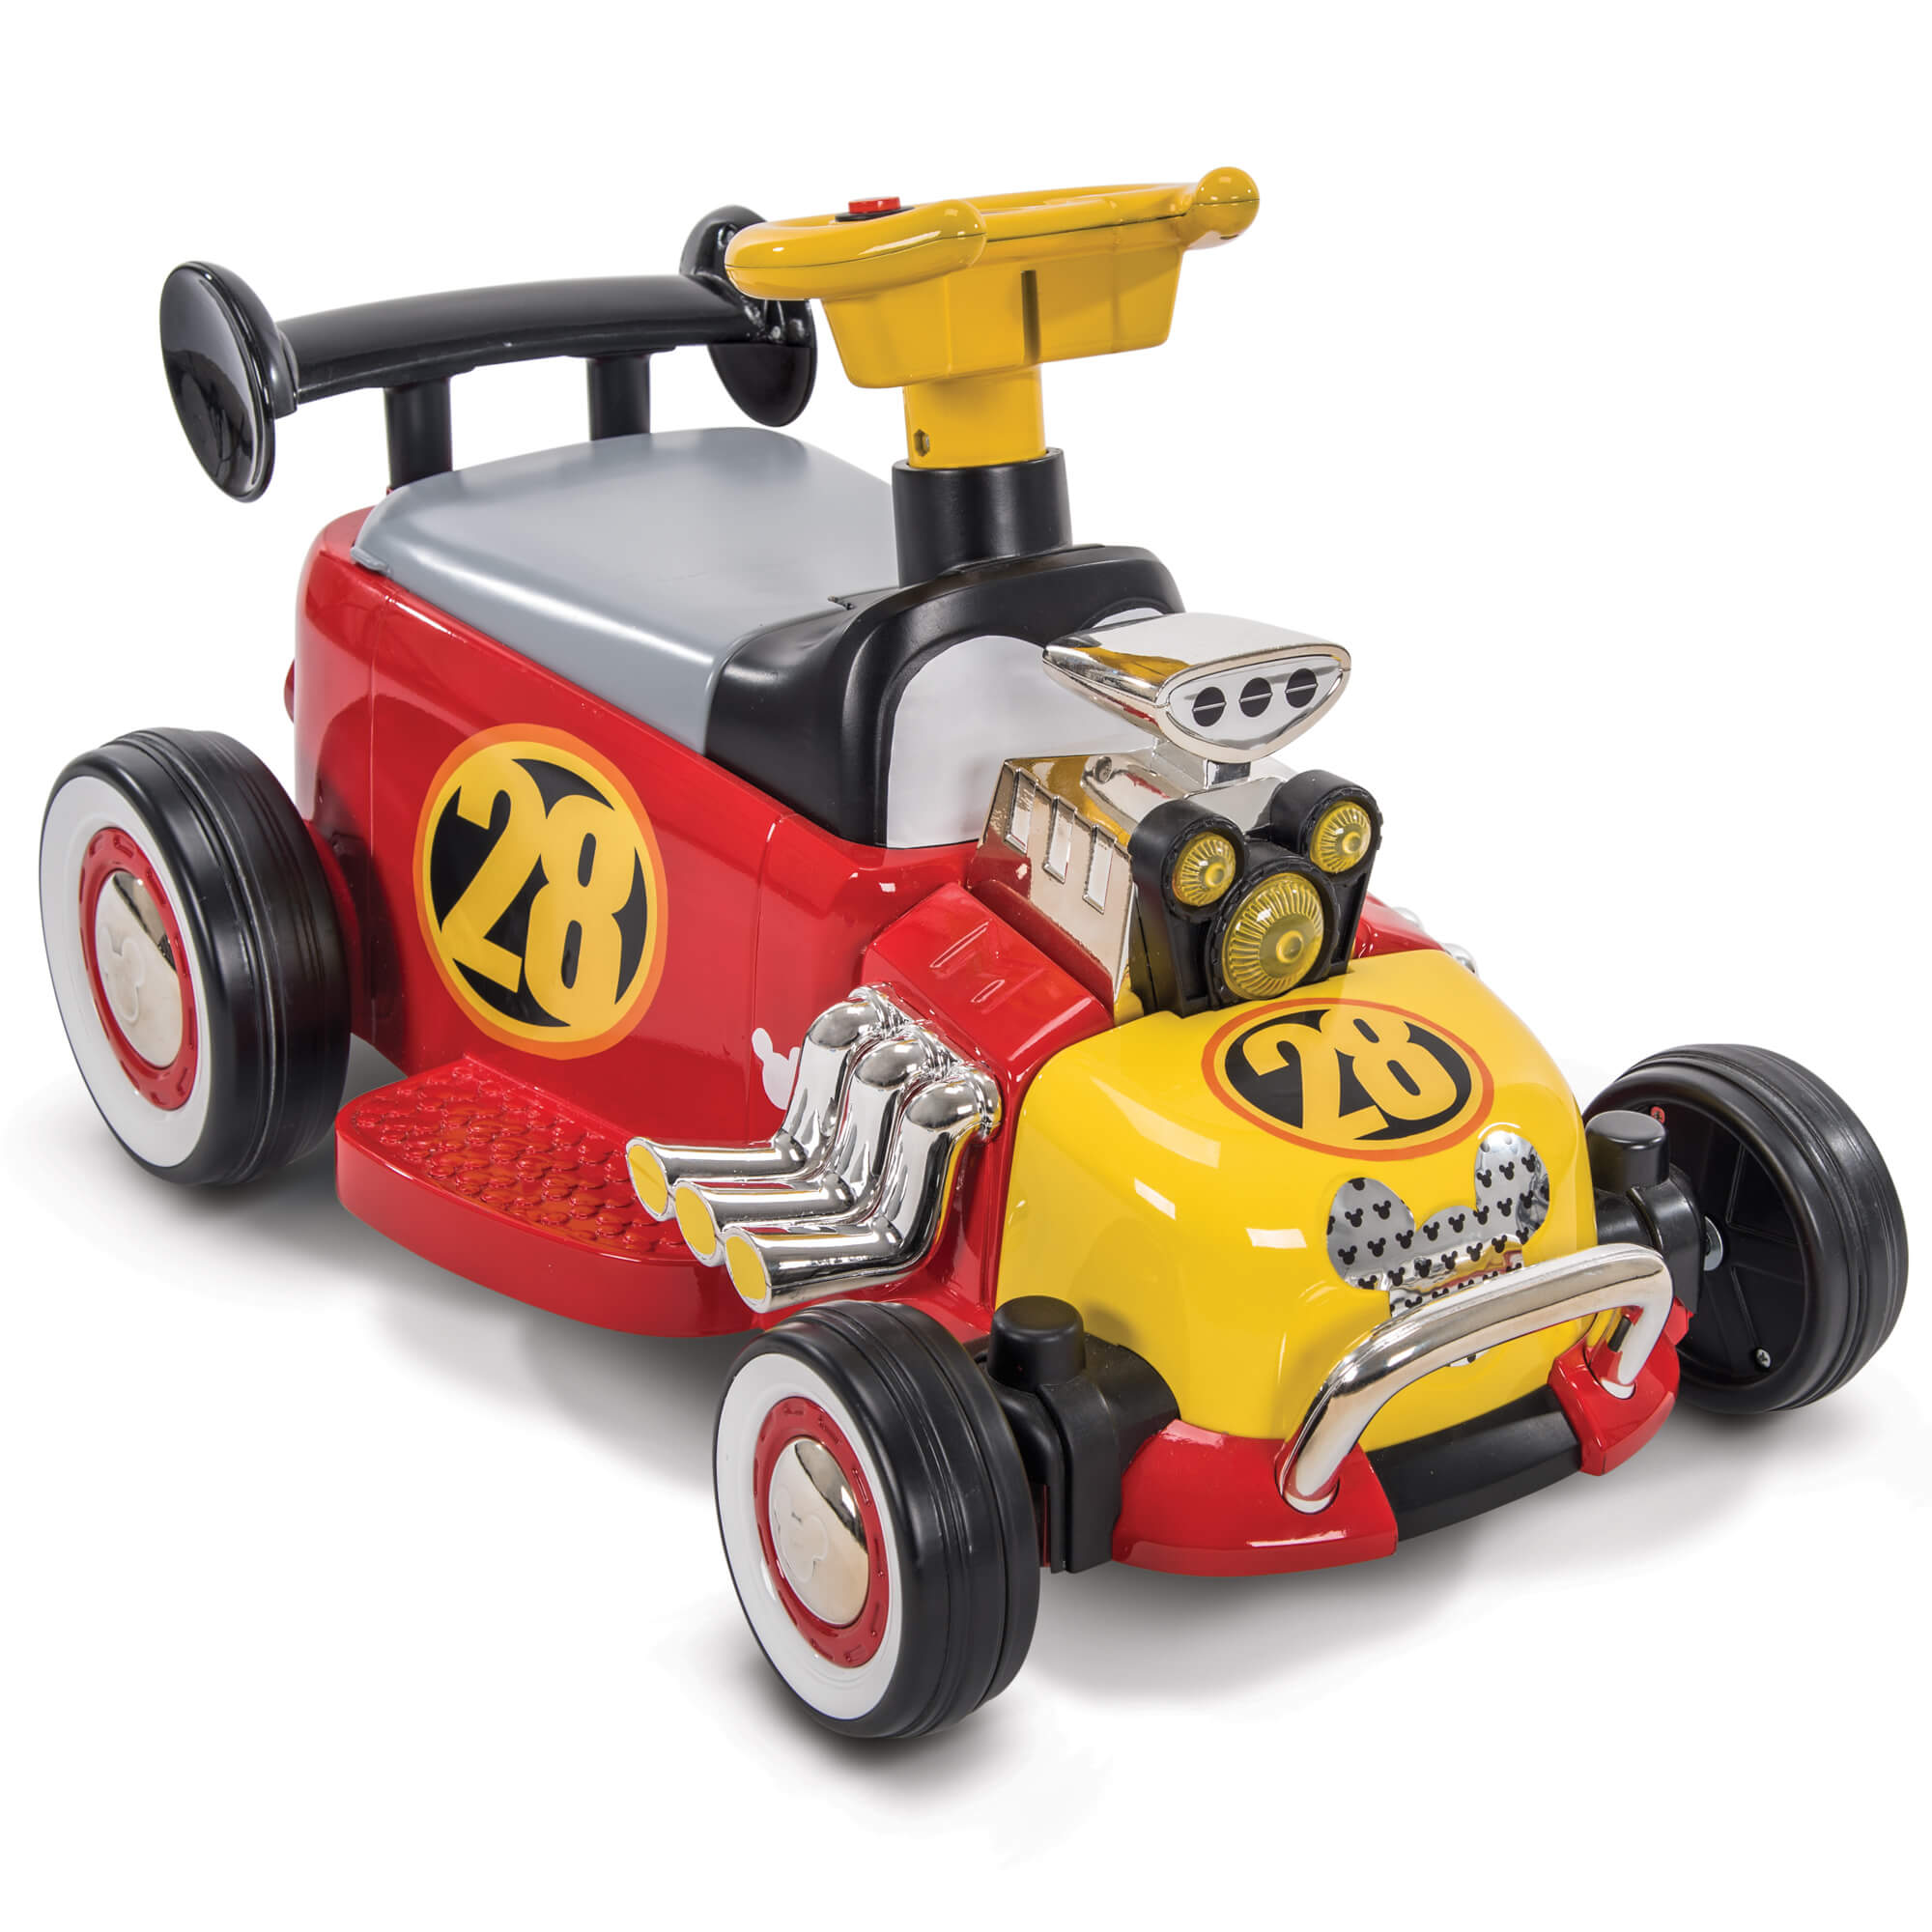 Disney Mickey Boys’ 6V Battery-Powered Ride-On Quad by Huffy - image 3 of 11